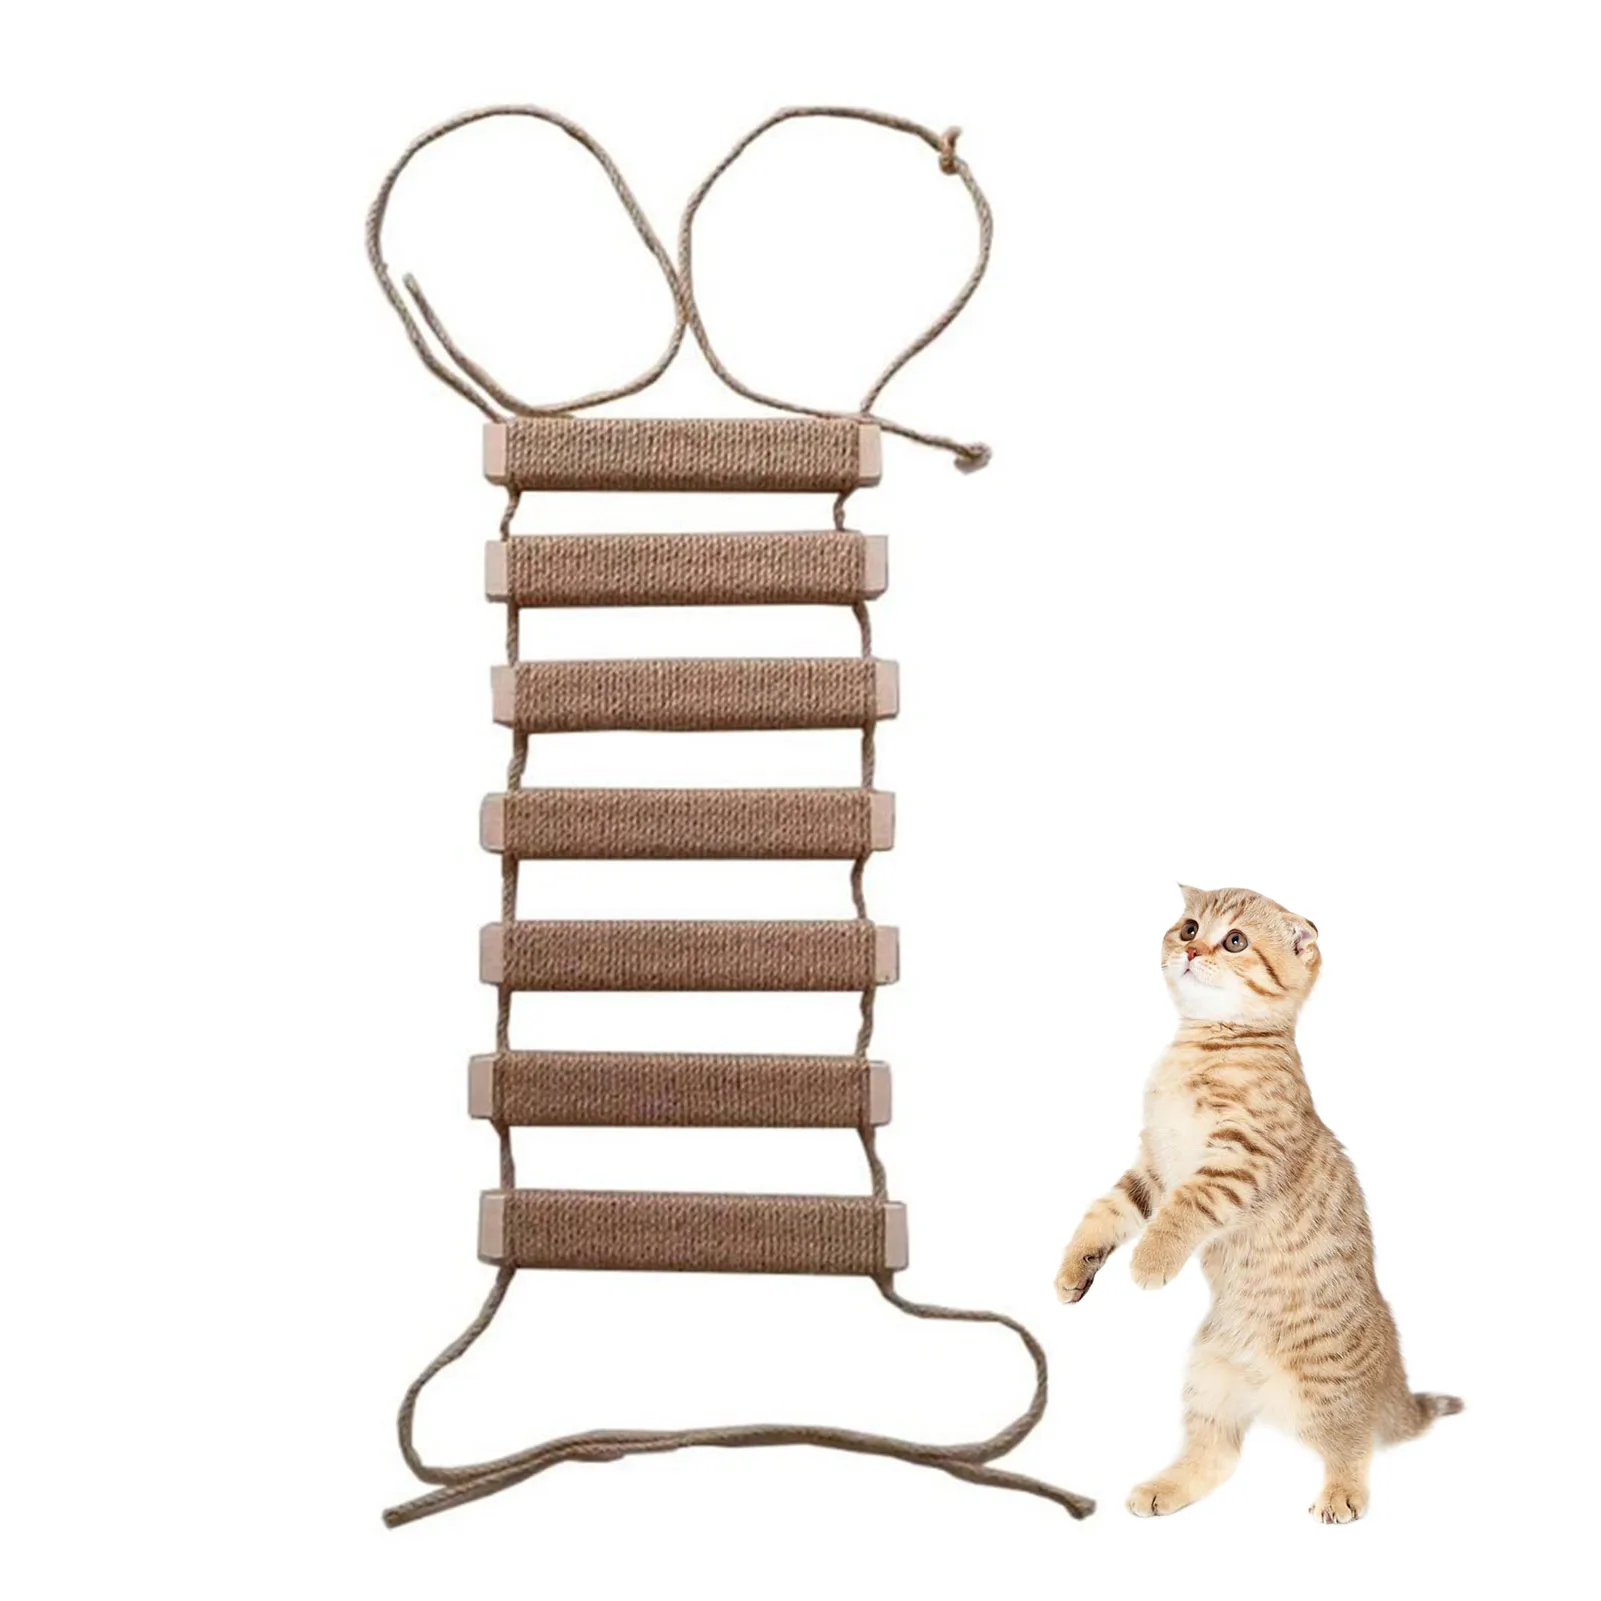 

Cat Bridge Suspension Bridge For Cats Wall Climbing Wood Climbing Frame For Cat Cat Furniture For Wall Cage